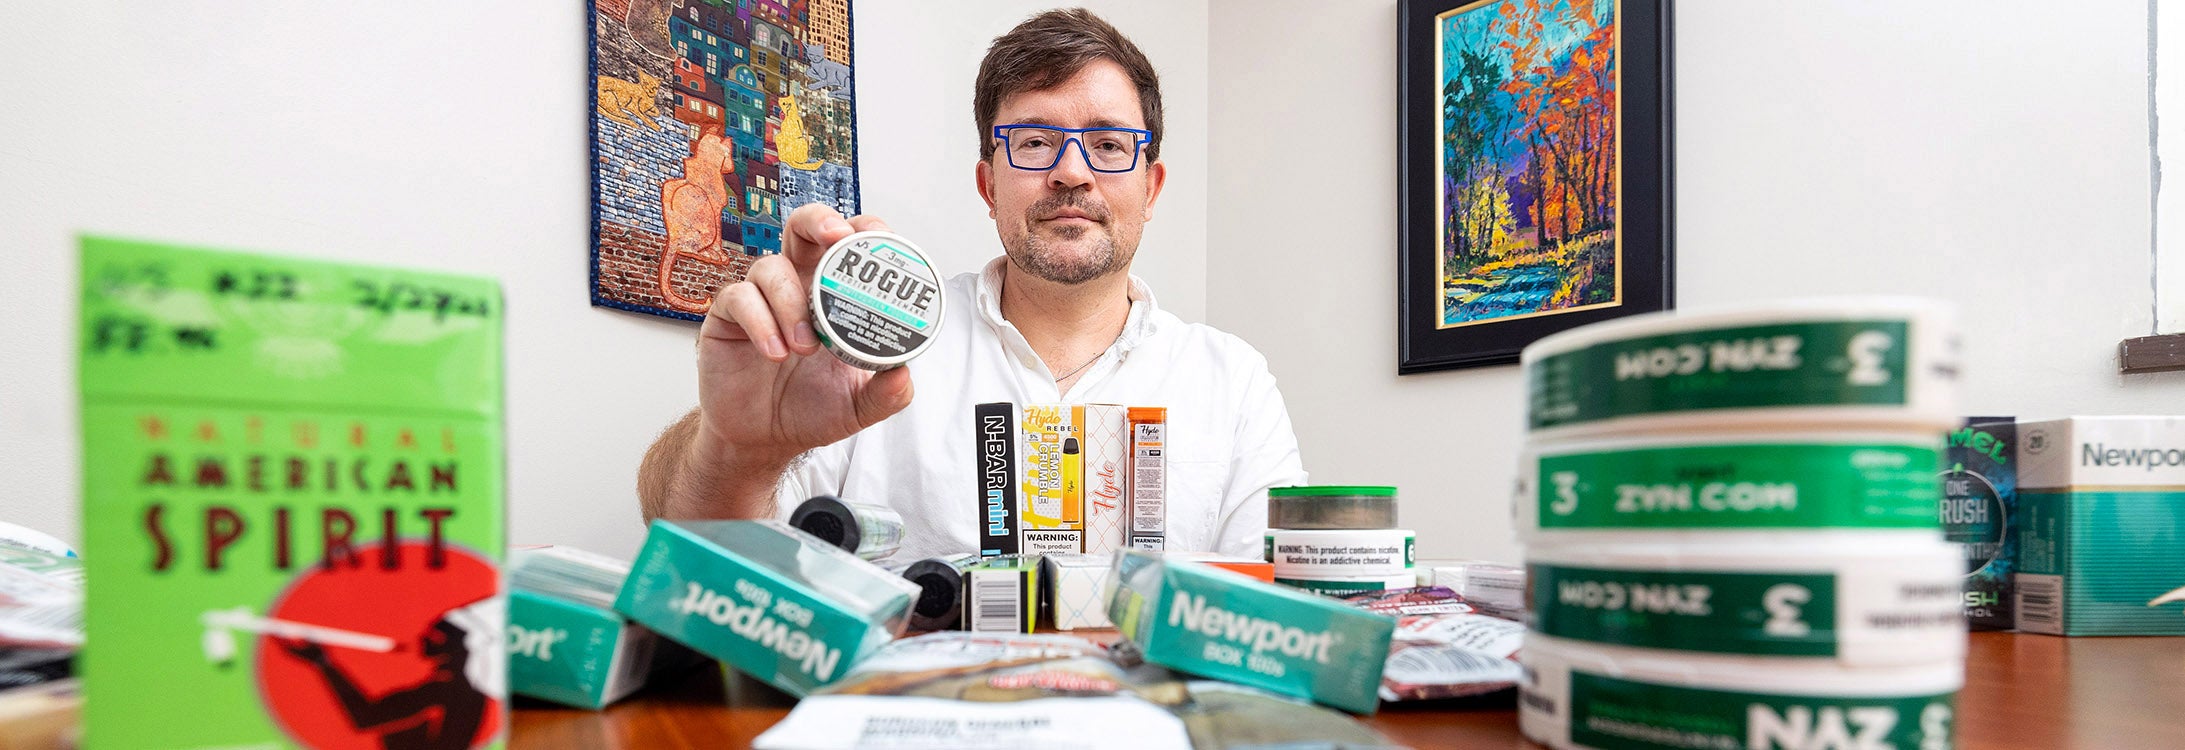 Joseph Lee holds a nicotine pouch product while surrounded by other tobacco products.